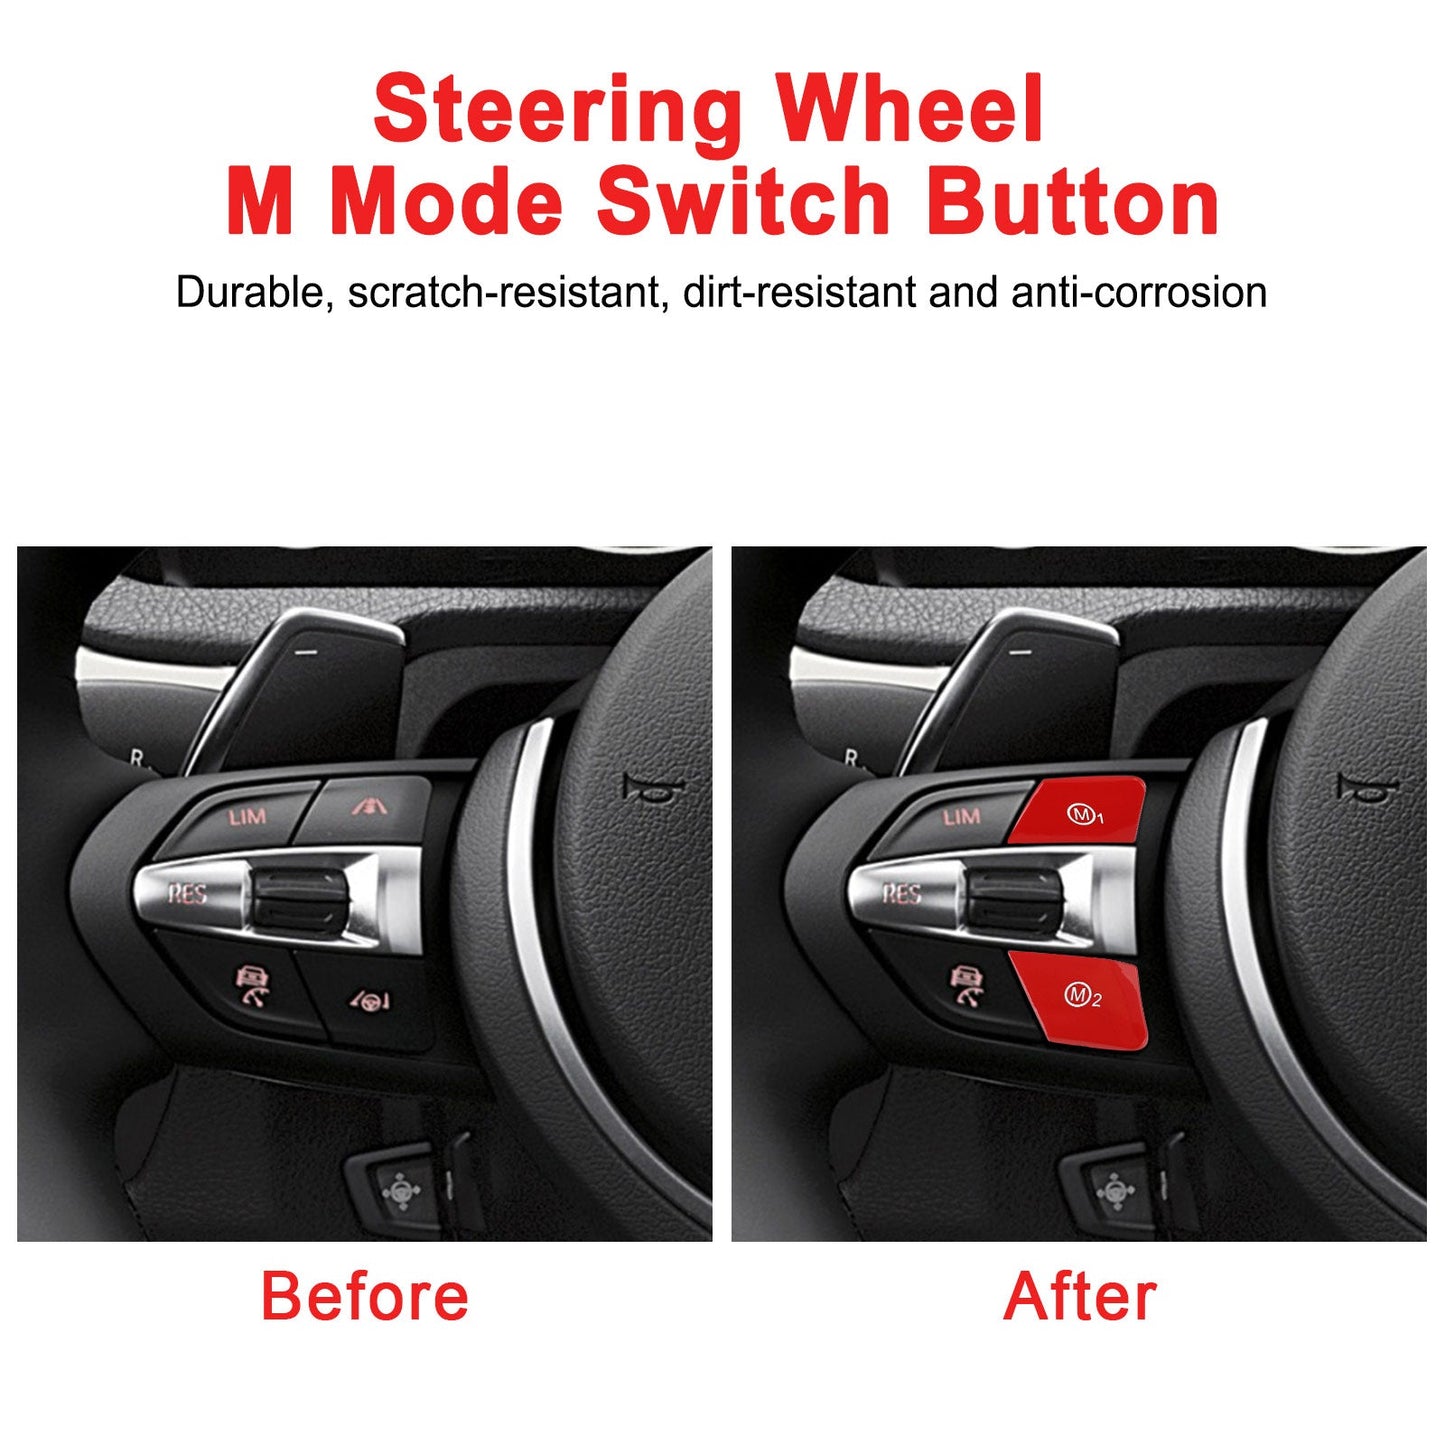 Steering Wheel M Mode Switch Button Fit For BMW F30 F34 F15 F16 Red